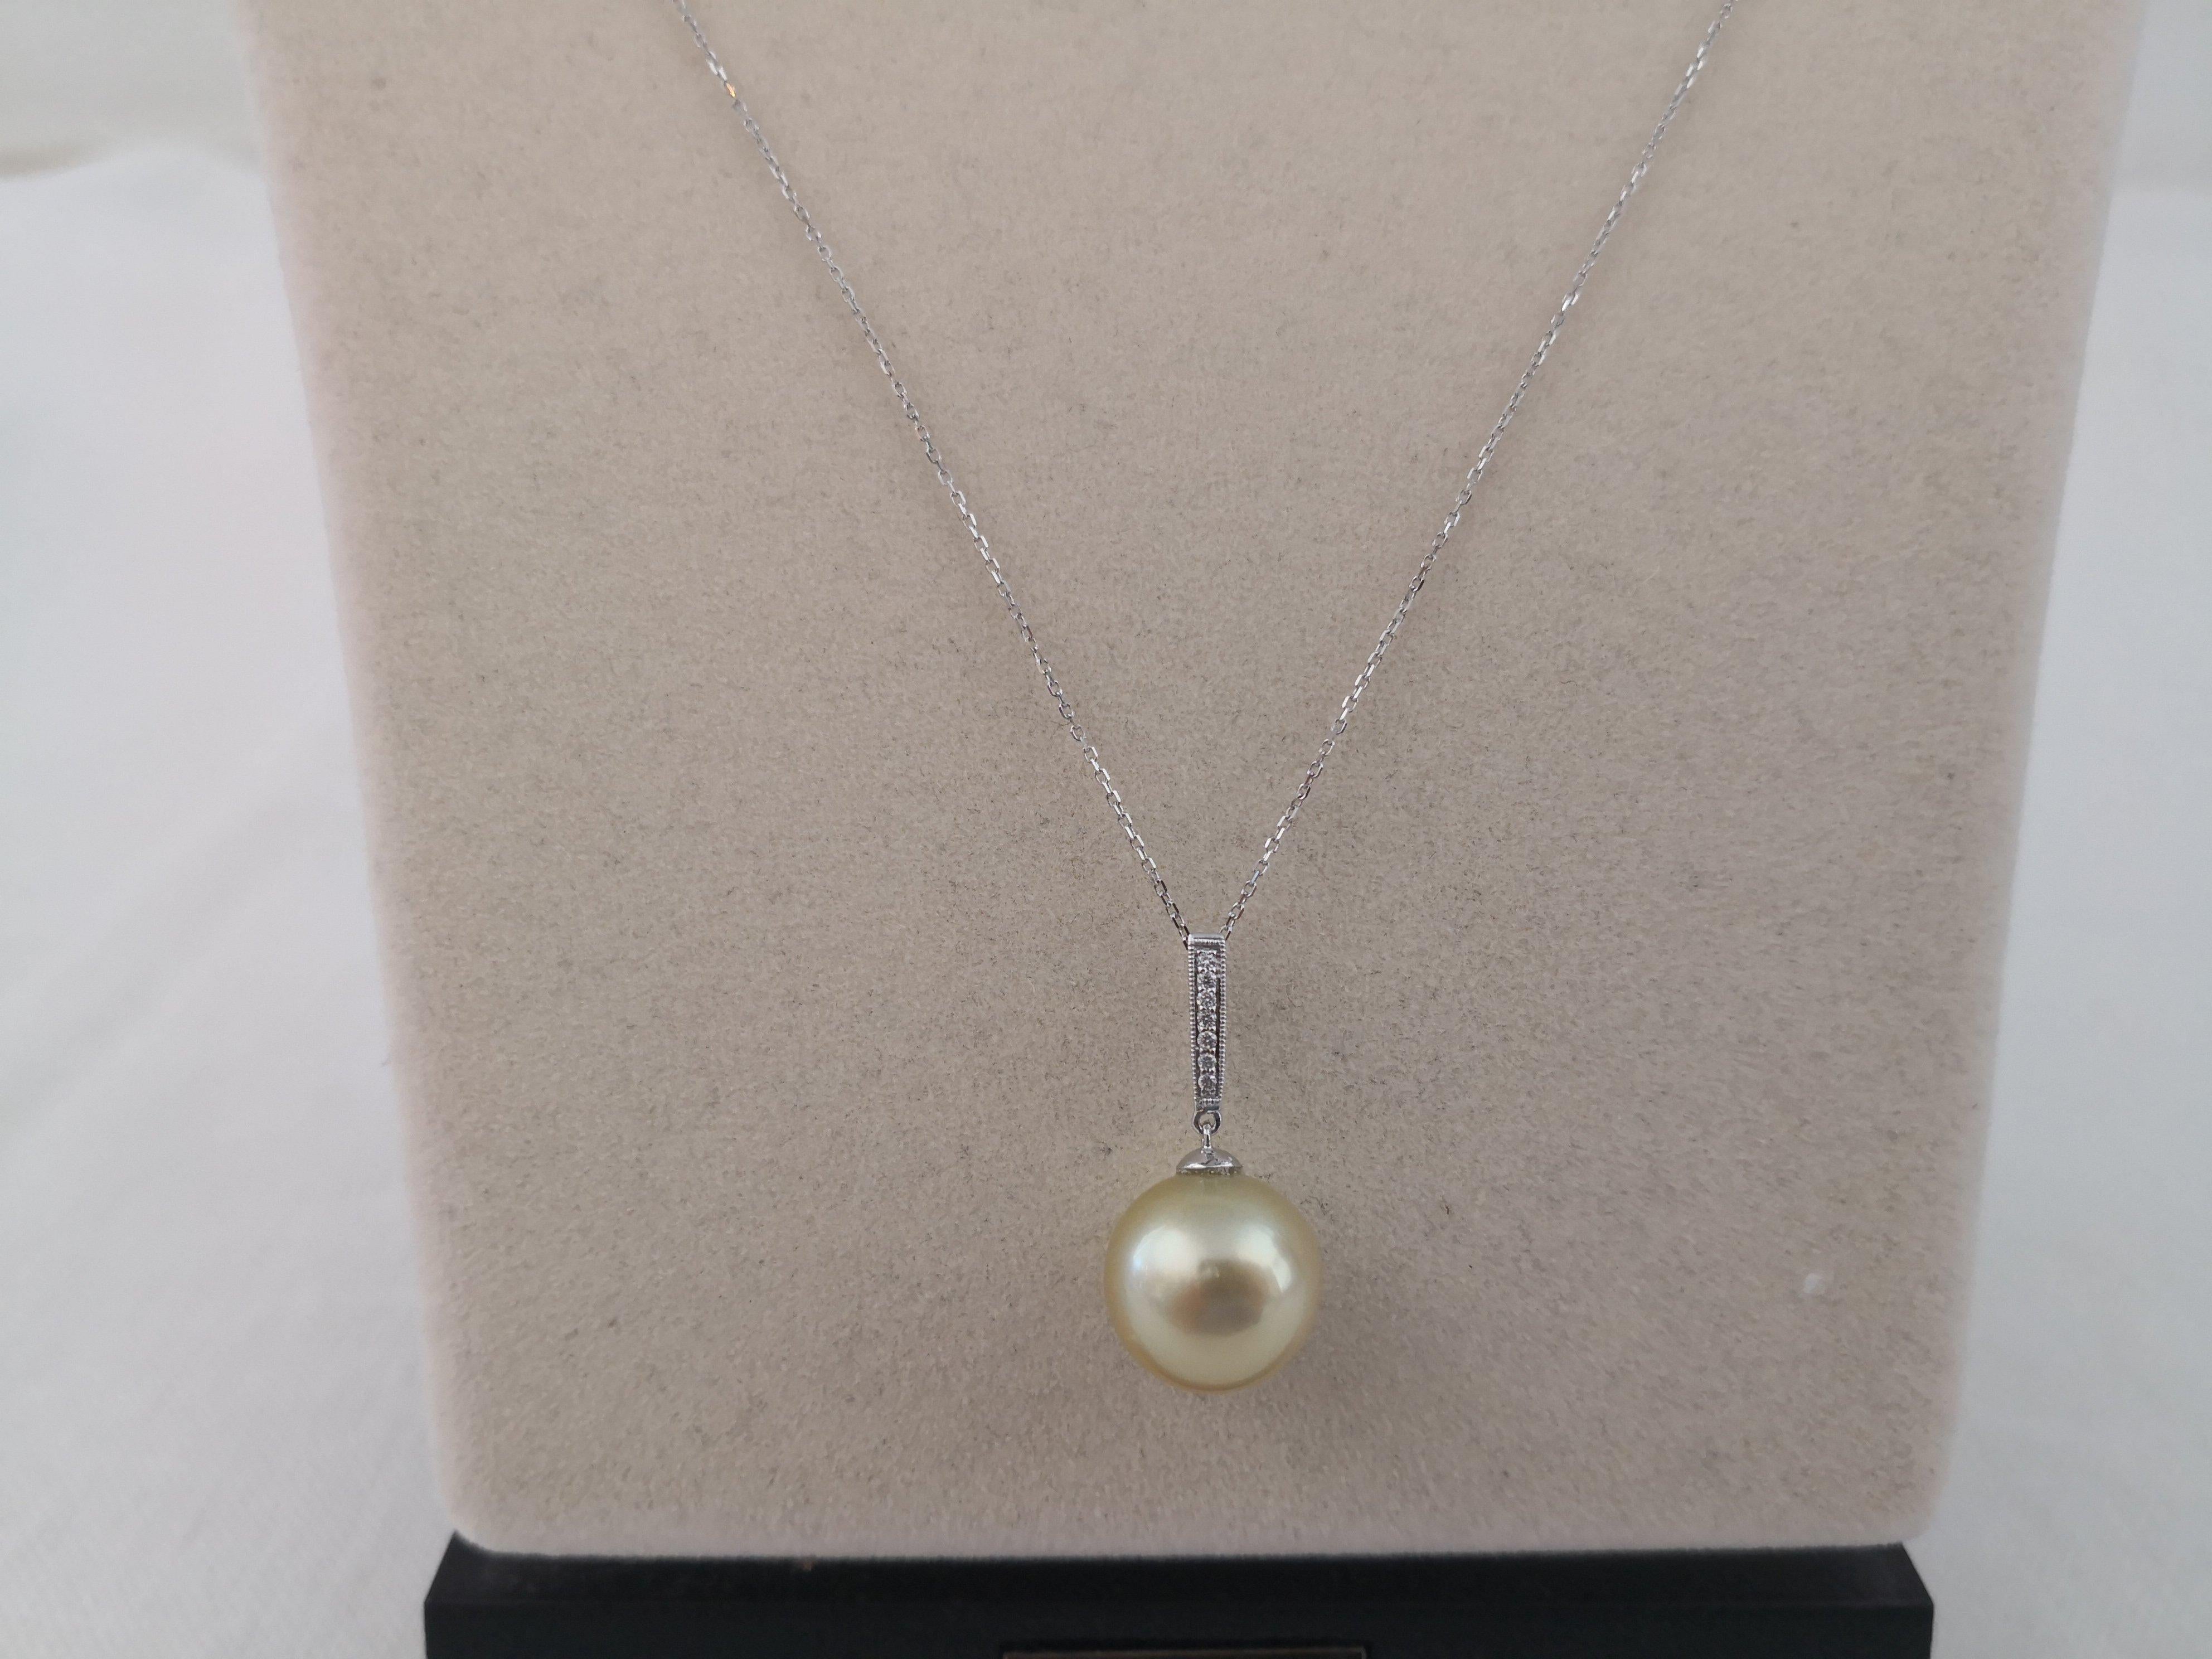 A Natural Color South Sea Pearl Pendant necklace

- Size of Pearl 13 mm mm of diameter

- Pearl from Pinctada Maxima Oyster

- Origin: Indonesia ocean waters

- Natural  Golden  Color pearl

- Natural luster and orient

- Pearls of Near Round